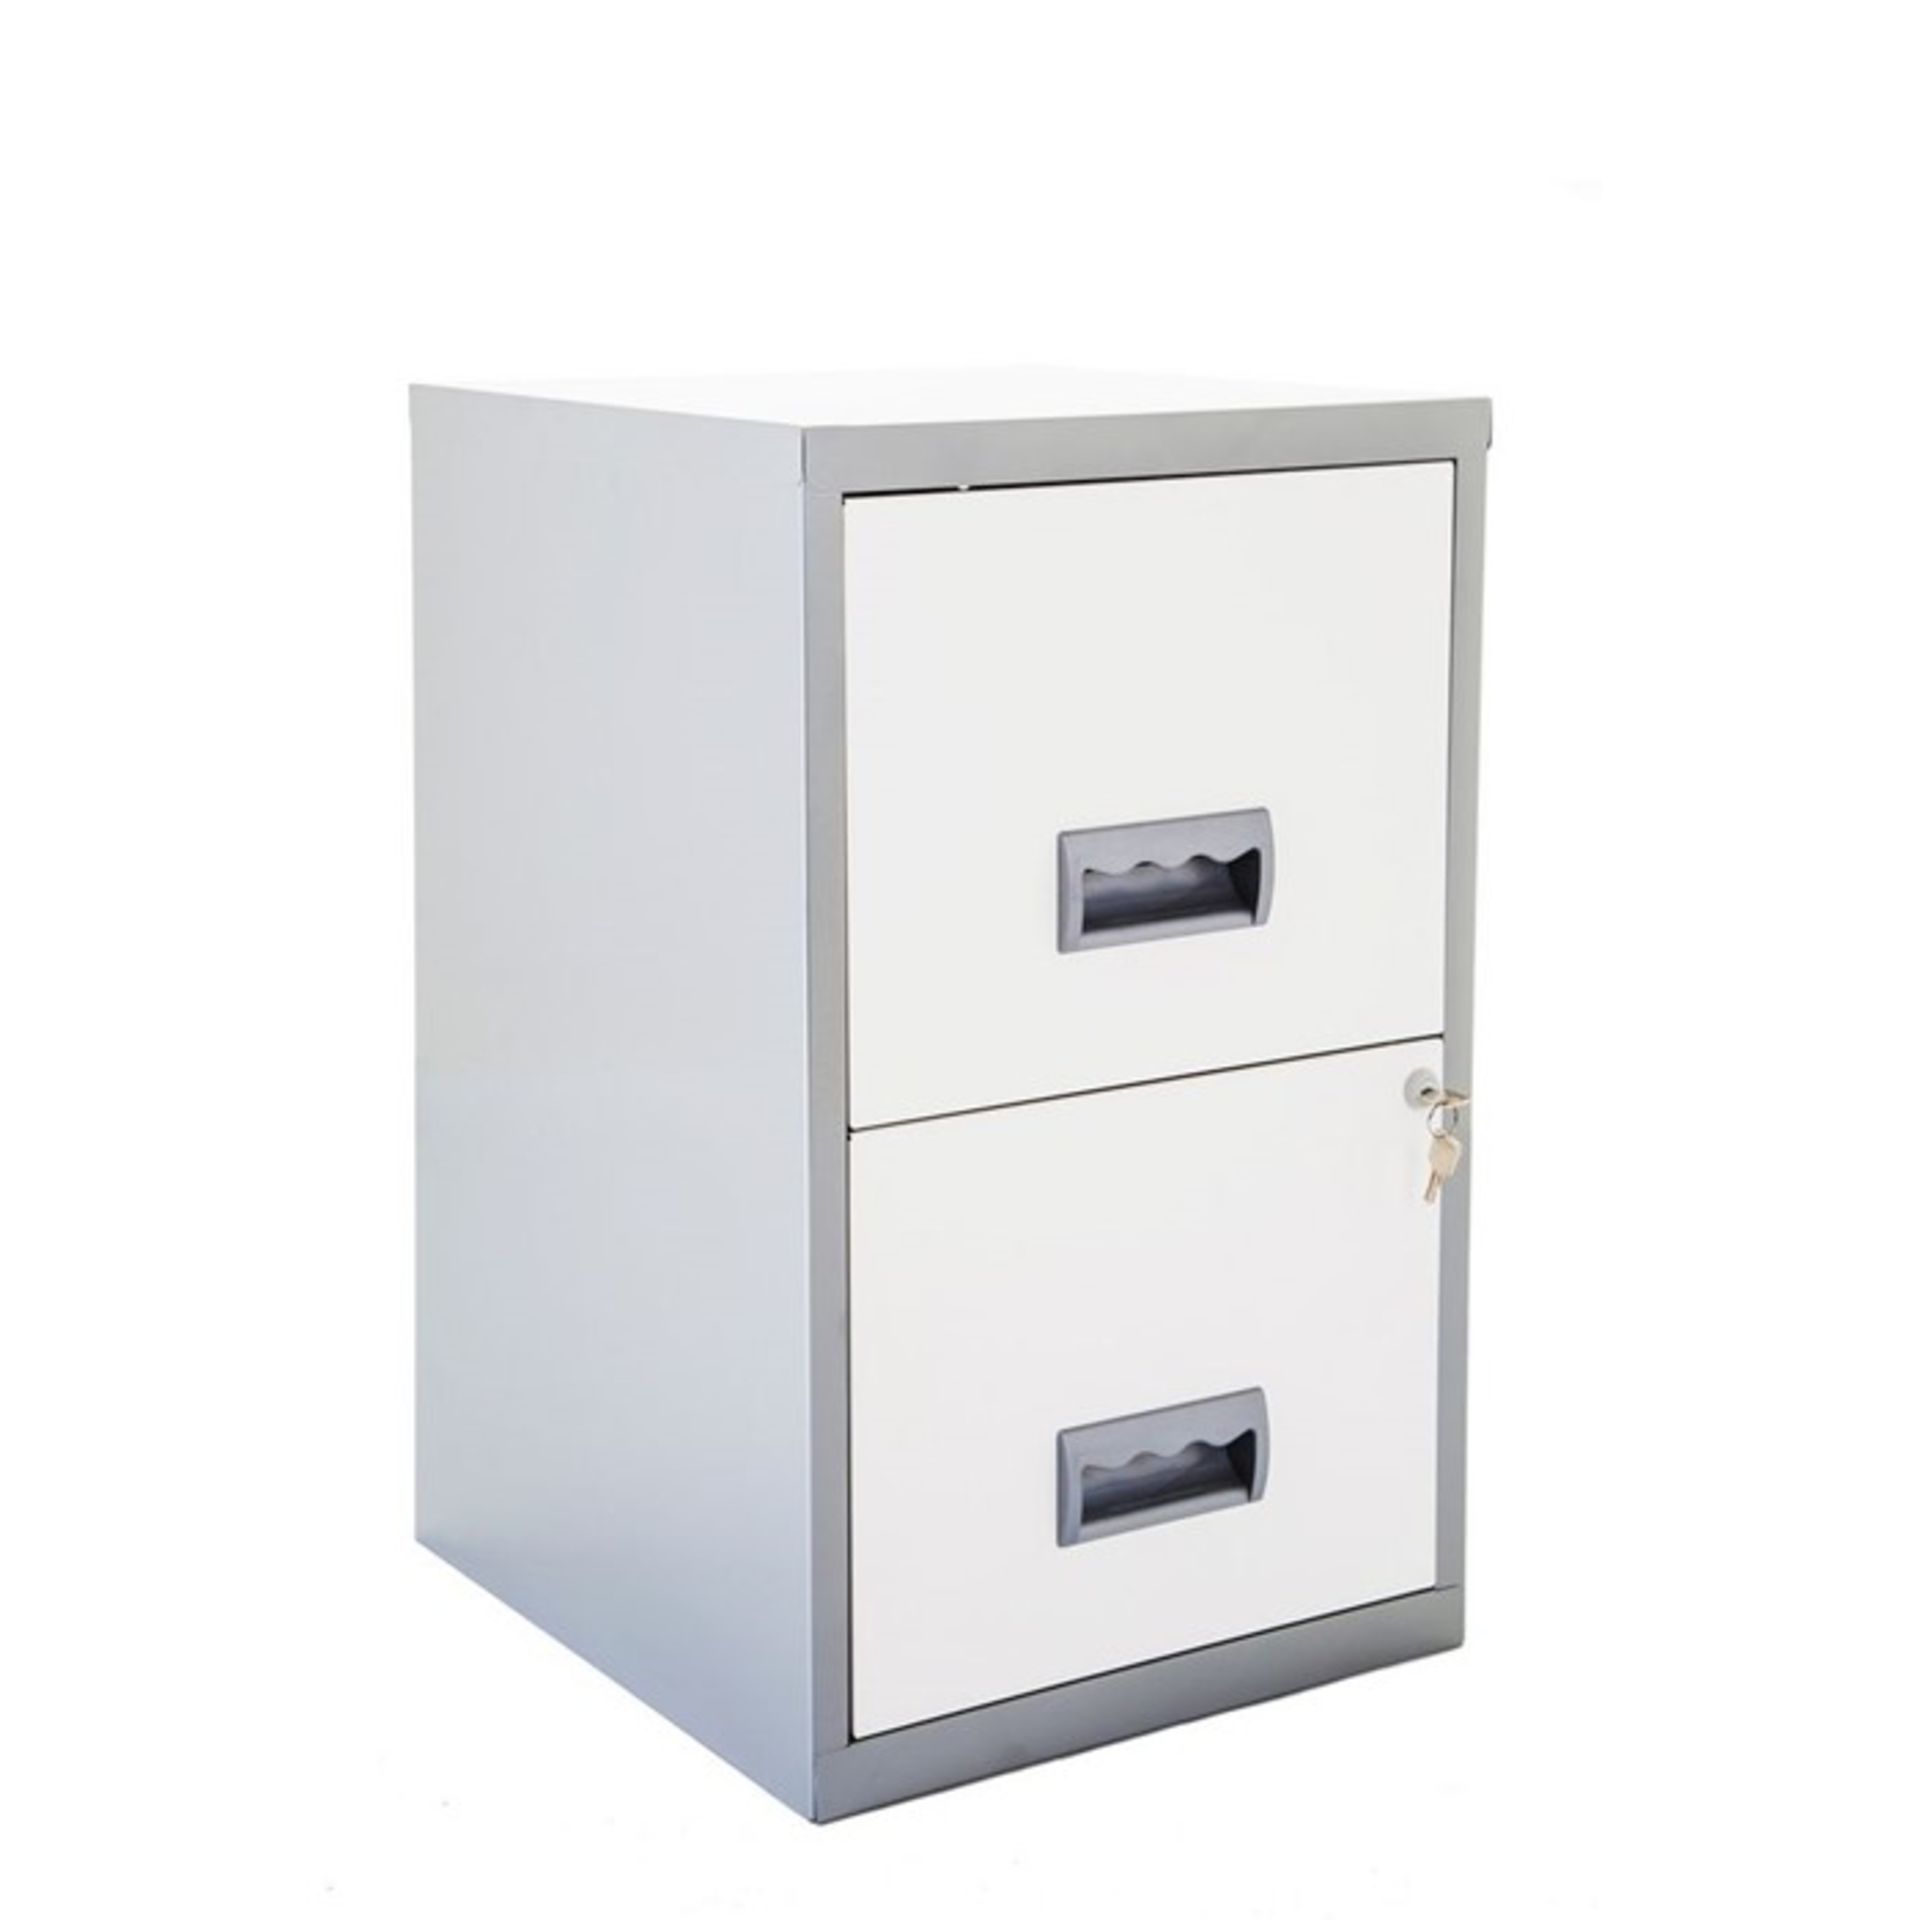 1 GRADE B 2 DRAWER BISLEY FILING CABINET IN WHITE/SILVER / PN - 215 / RRP £54.95 (VIEWING HIGHLY